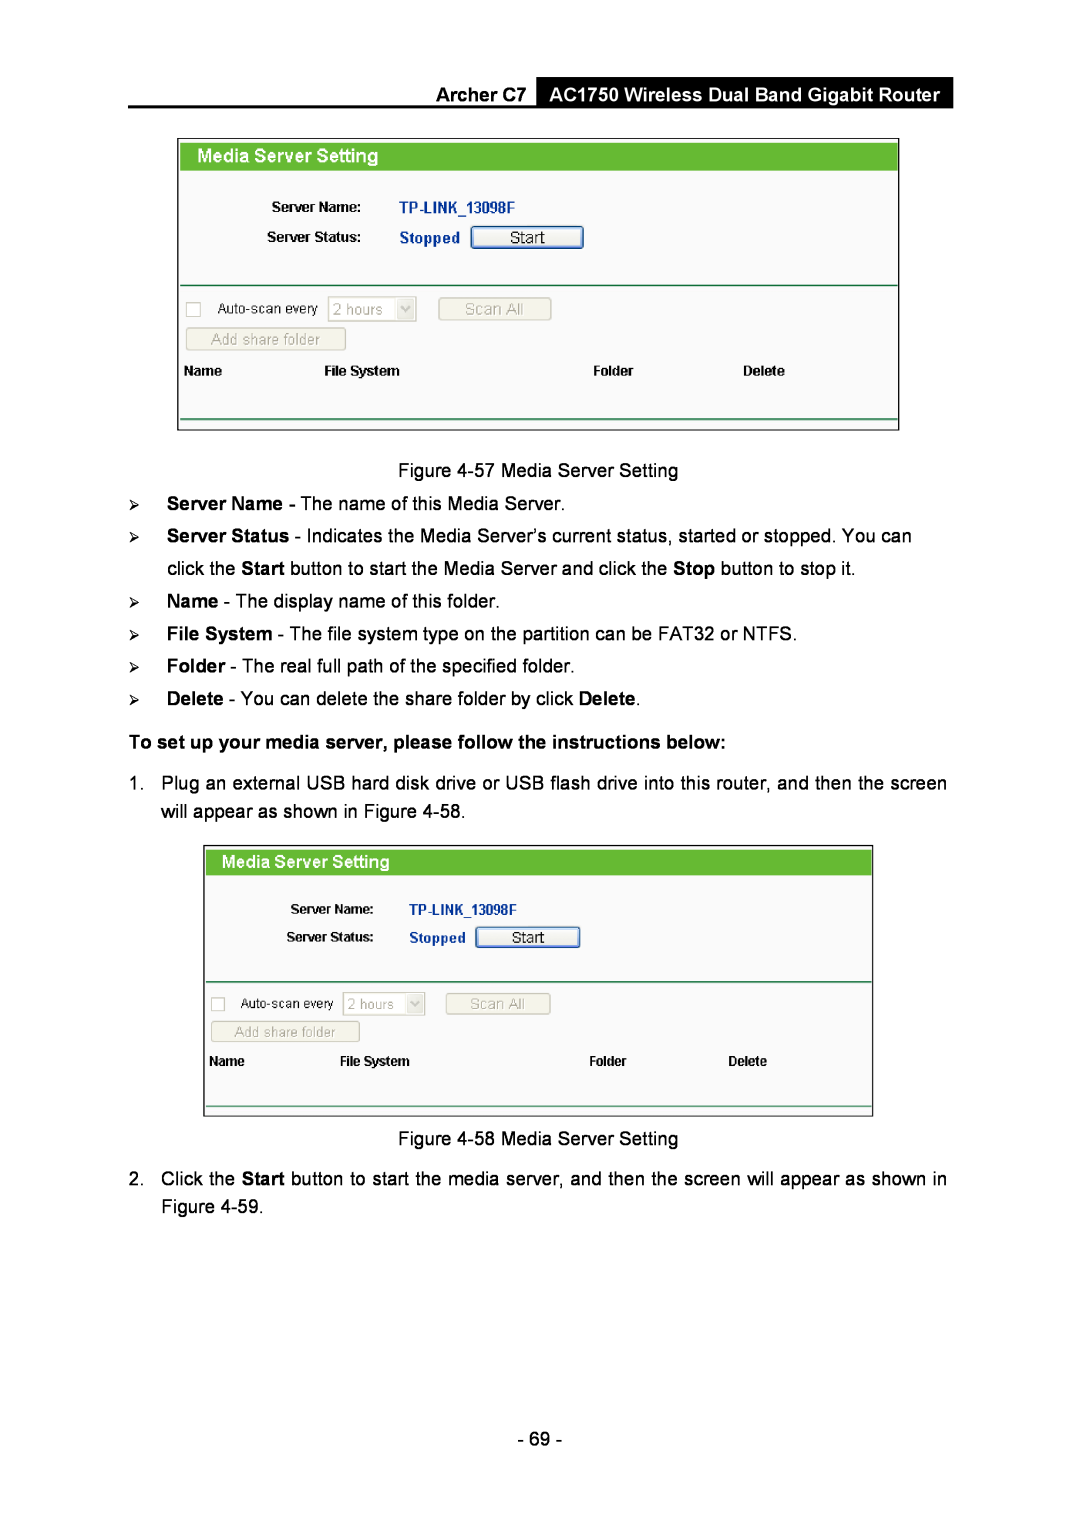 TP-Link AC1750 manual To set up your media server, please follow the instructions below 